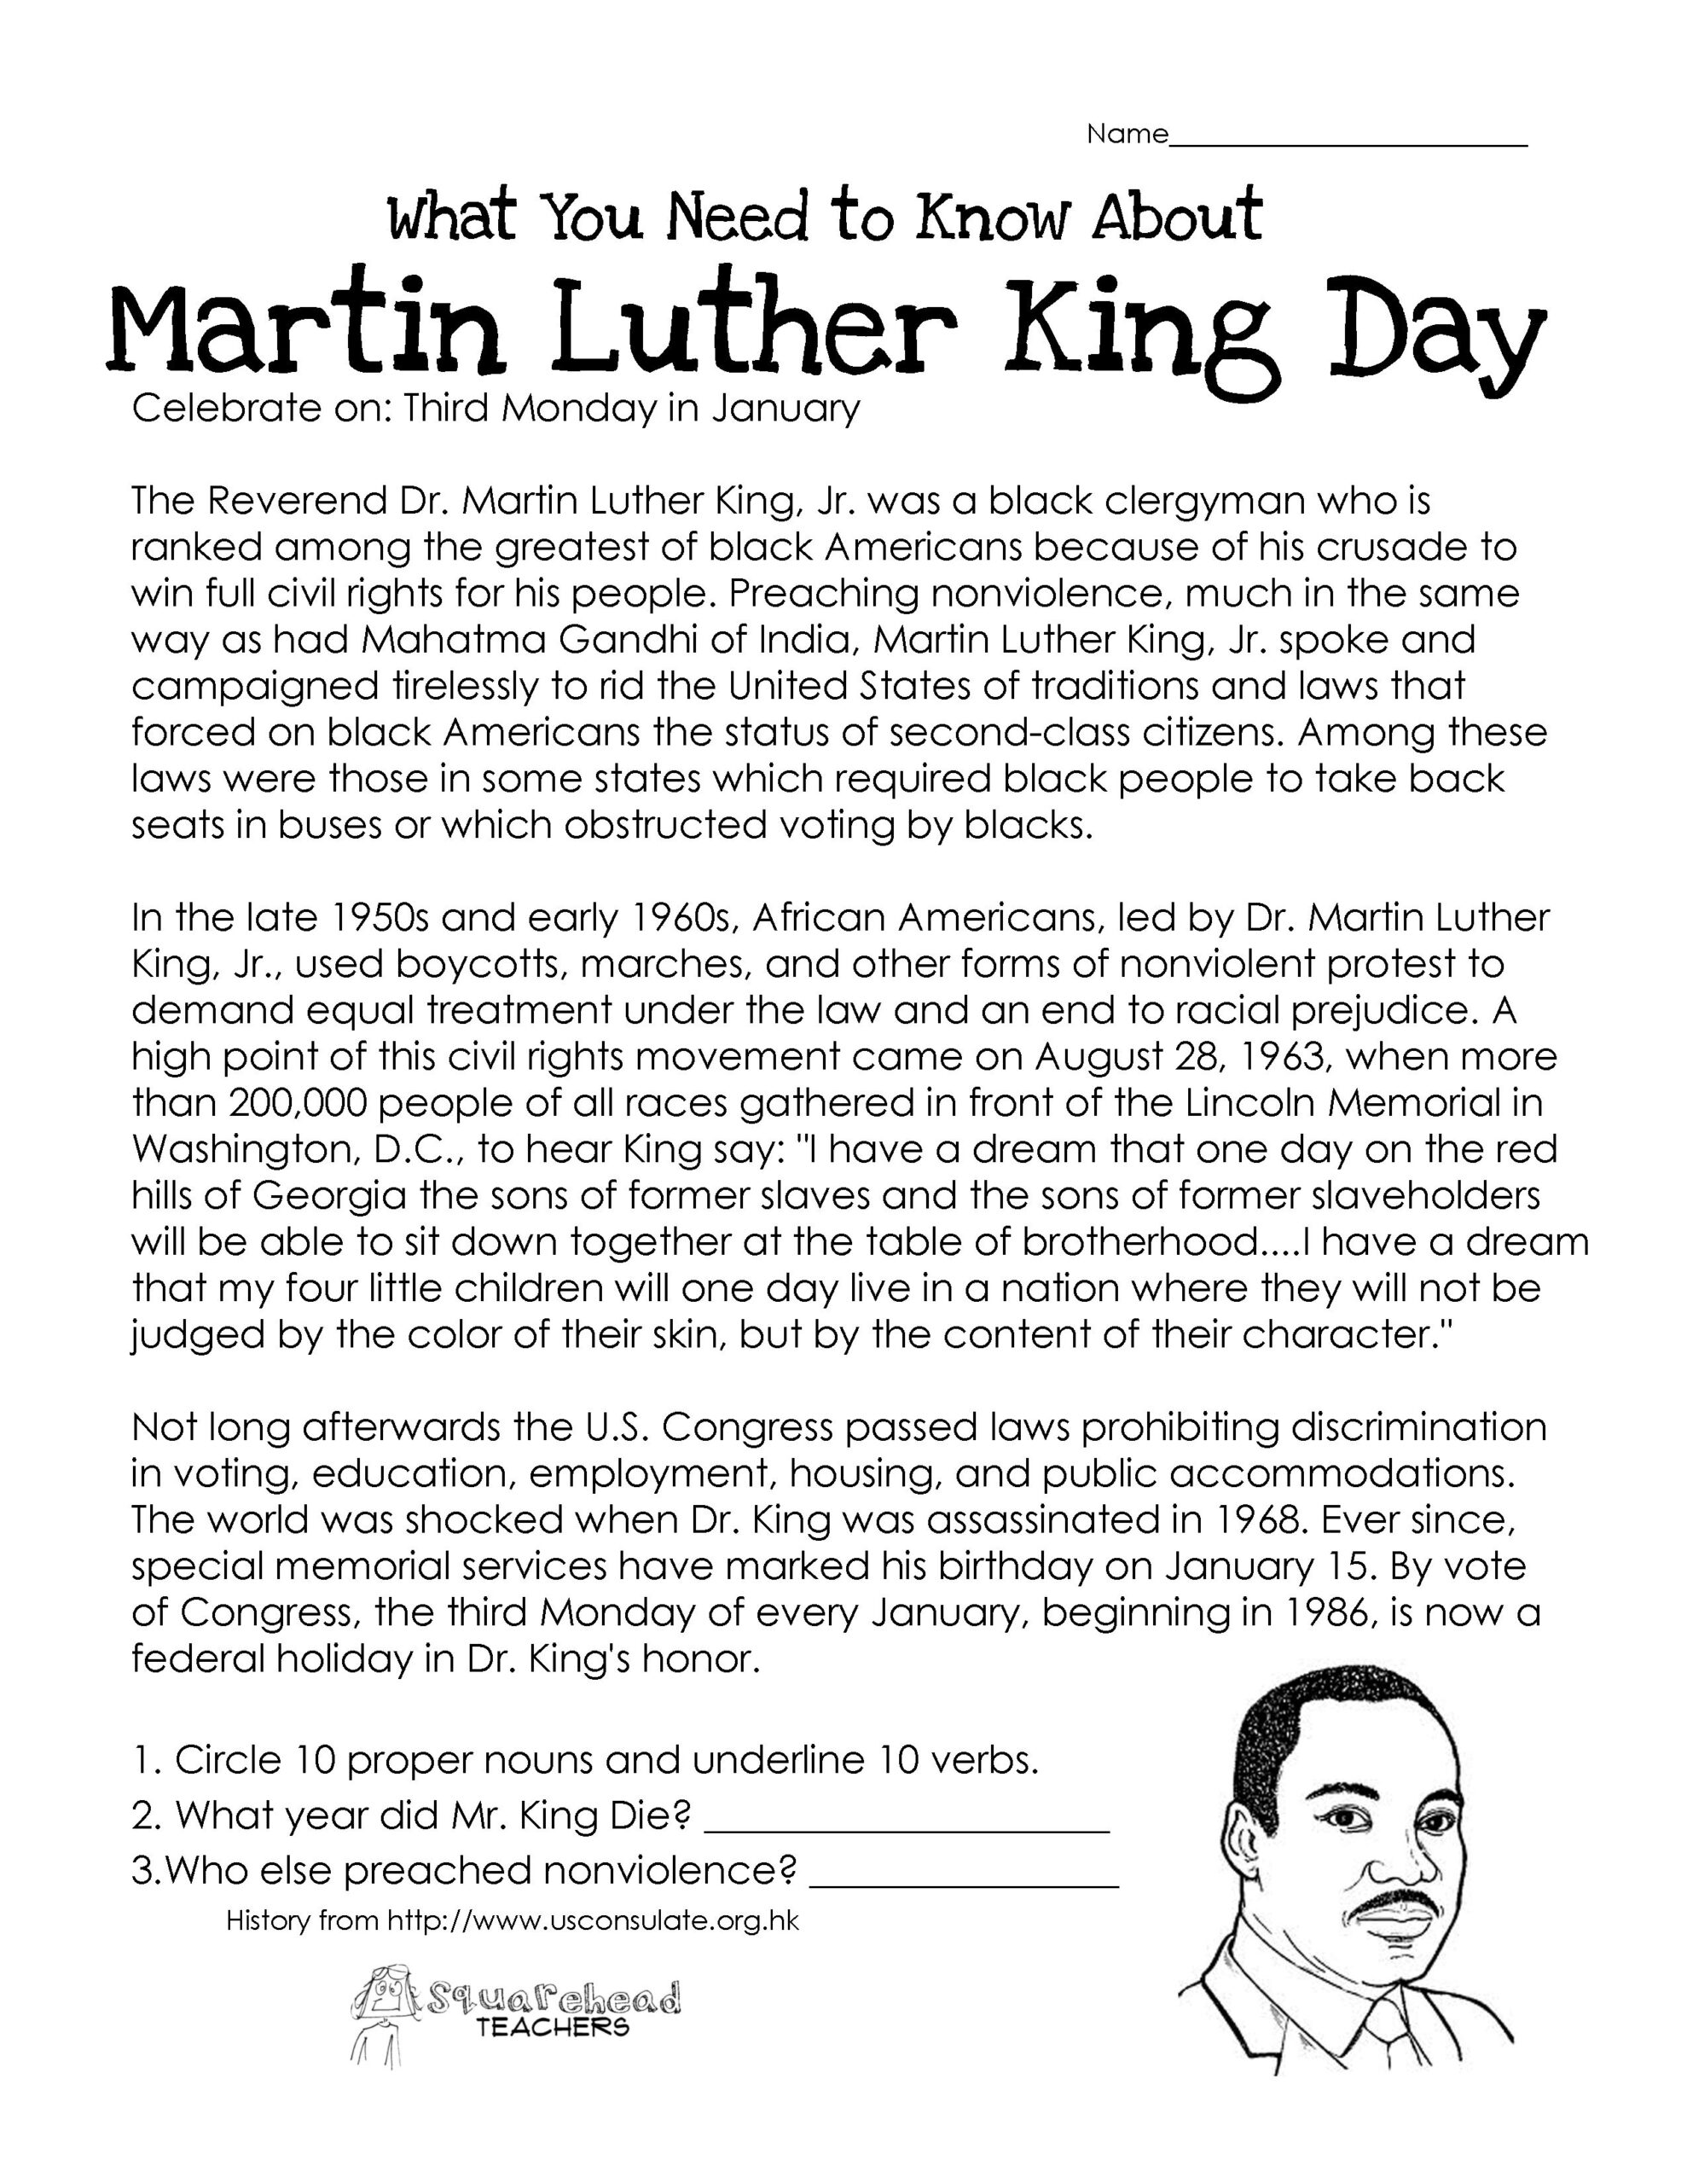 Martin Luther King Day (Free Worksheet) | Martin Luther King Jr intended for Free Printable Martin Luther King Jr Worksheets